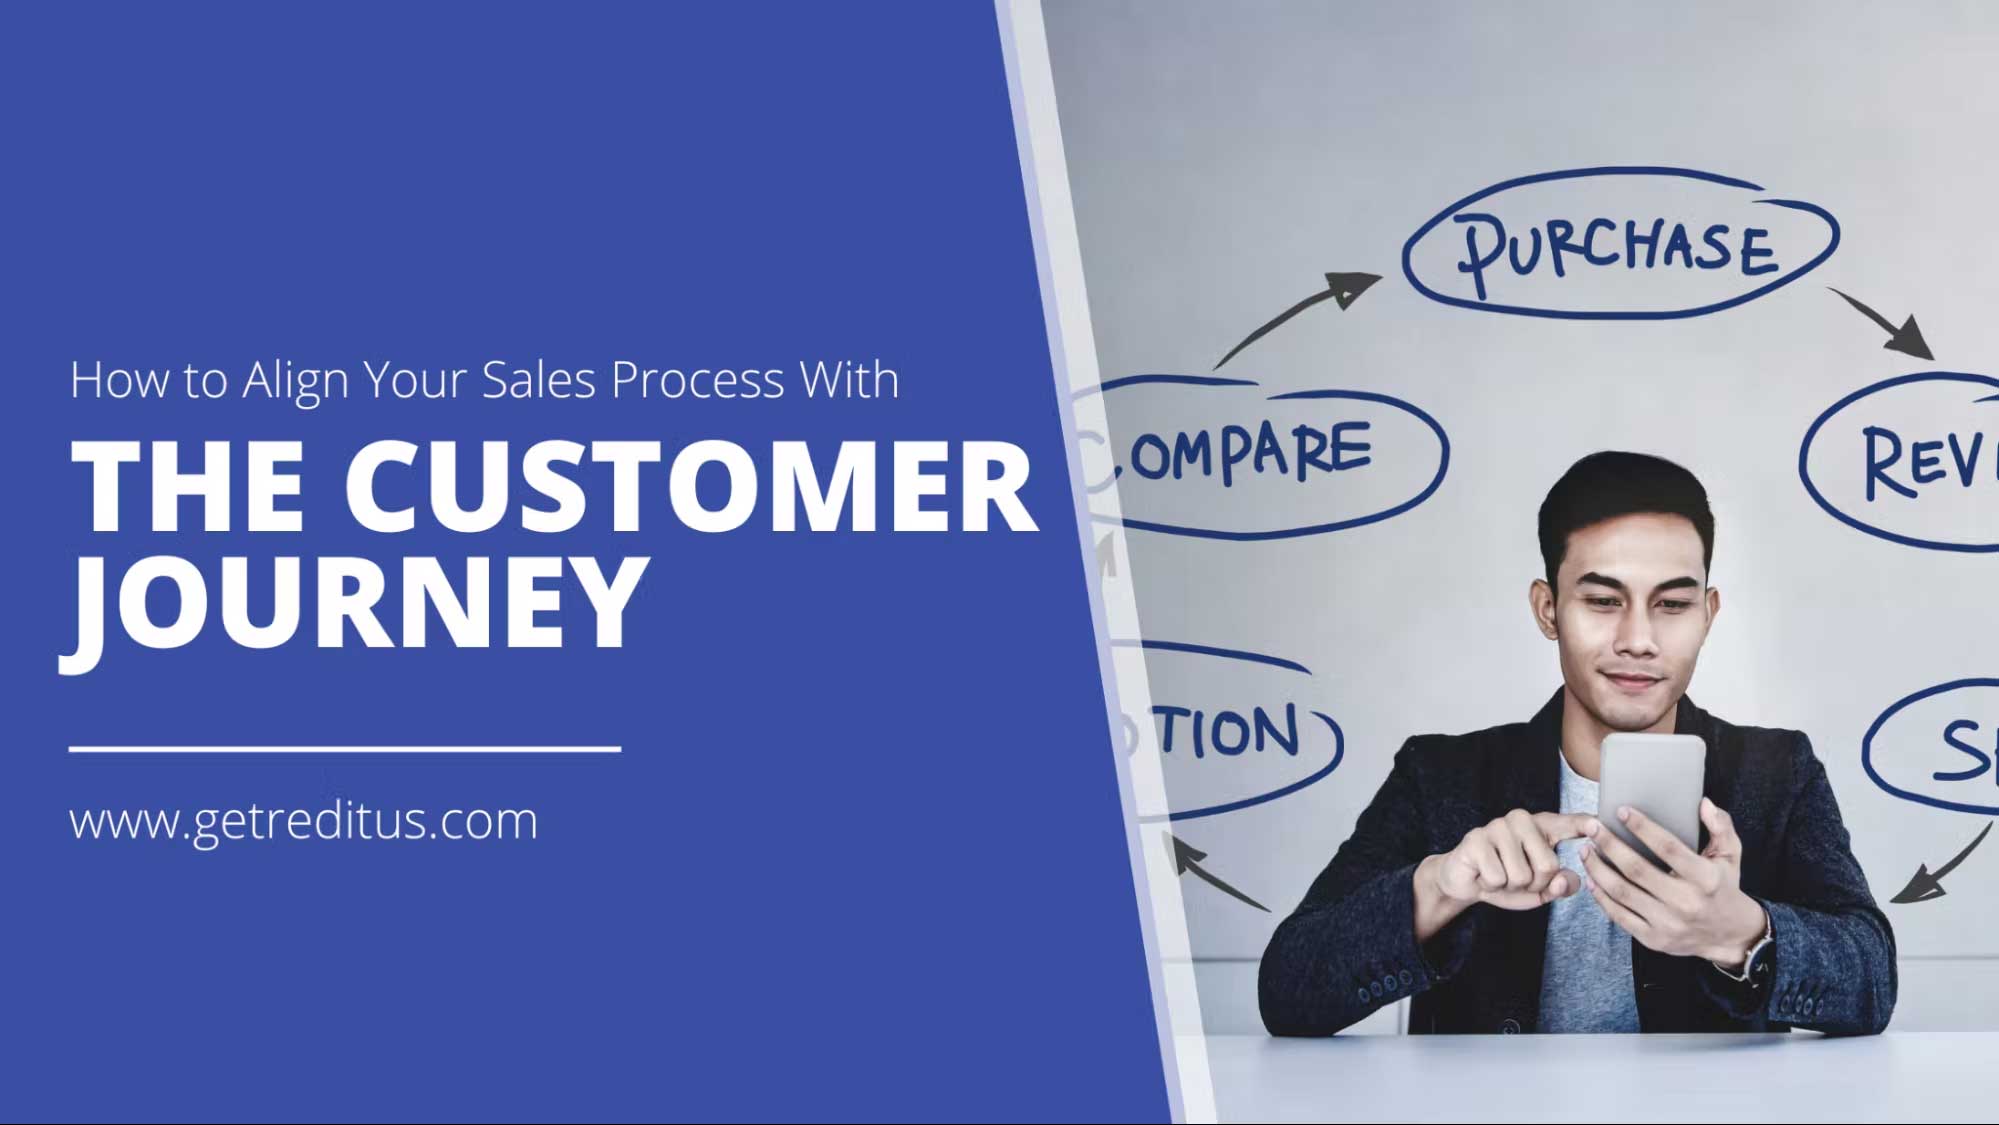 Align Your Sales Process With the Customer Journey: Full Guide.